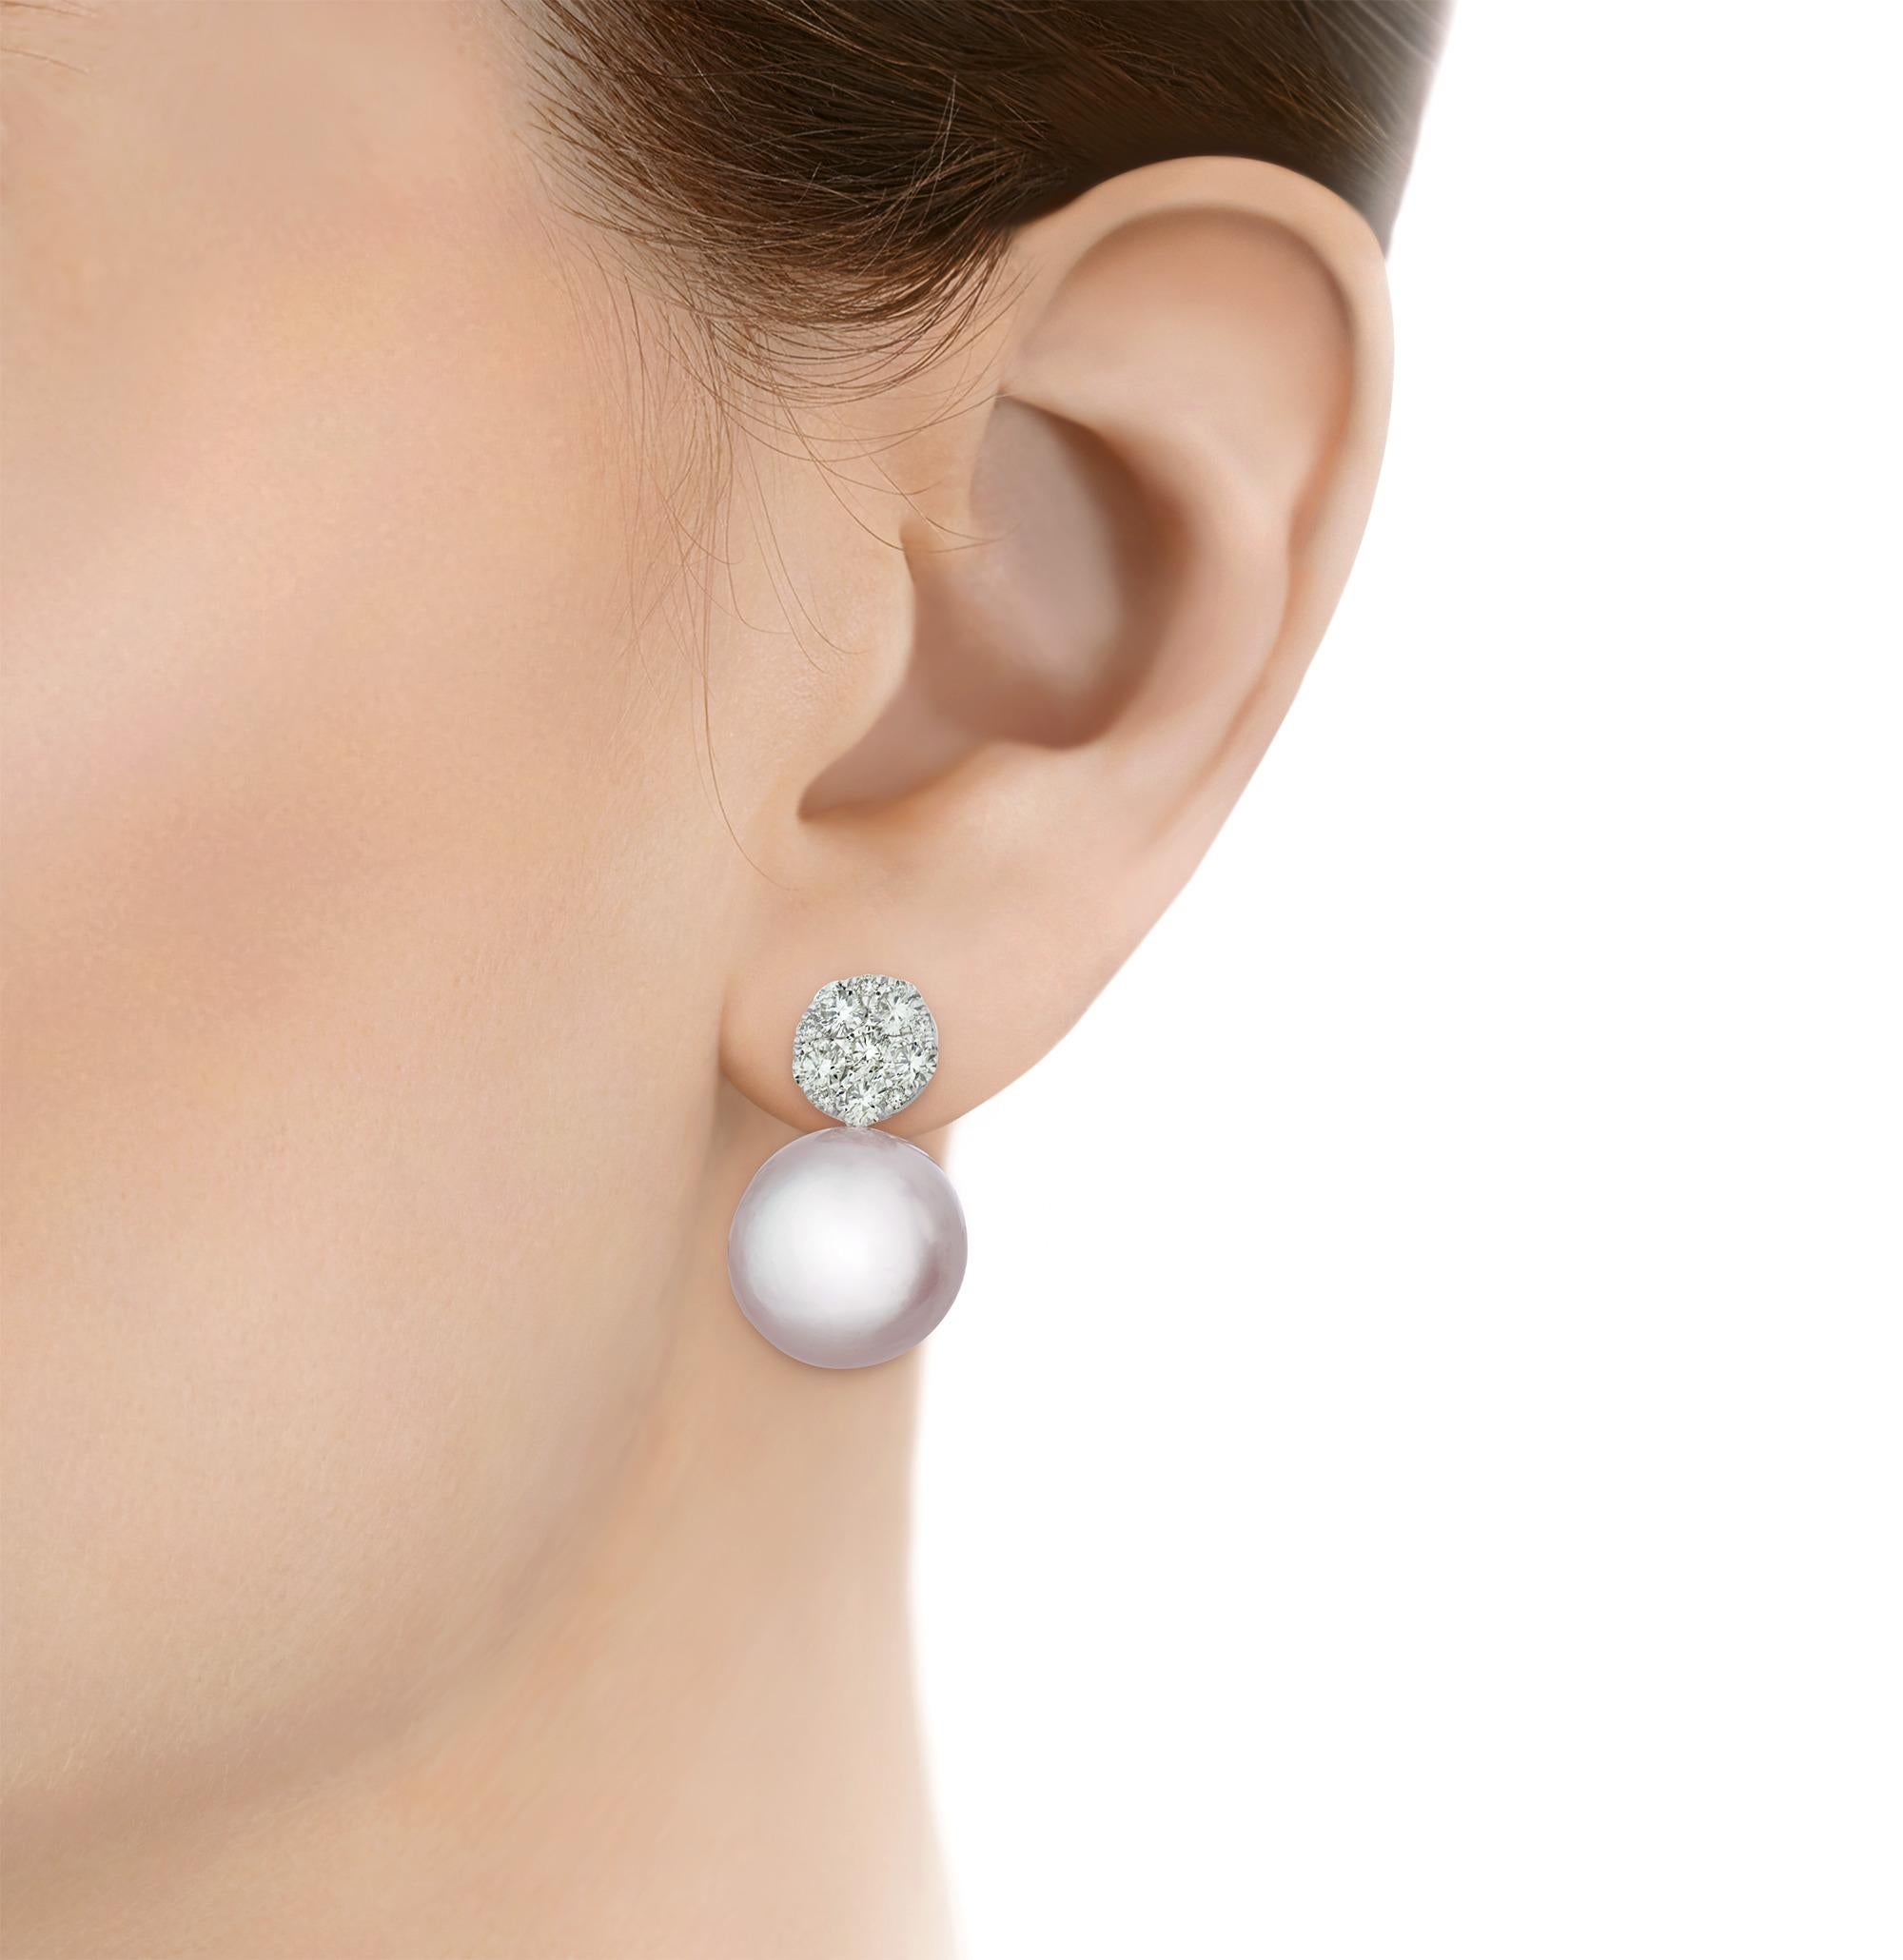 Elegant, refined and simply timeless, these beautiful earrings feature two of the sea's finest treasures, two 15-16mm South Sea pearls. The large and lustrous beauties drop down from sparkling clusters of white diamonds totaling 1.80 carats. Set in